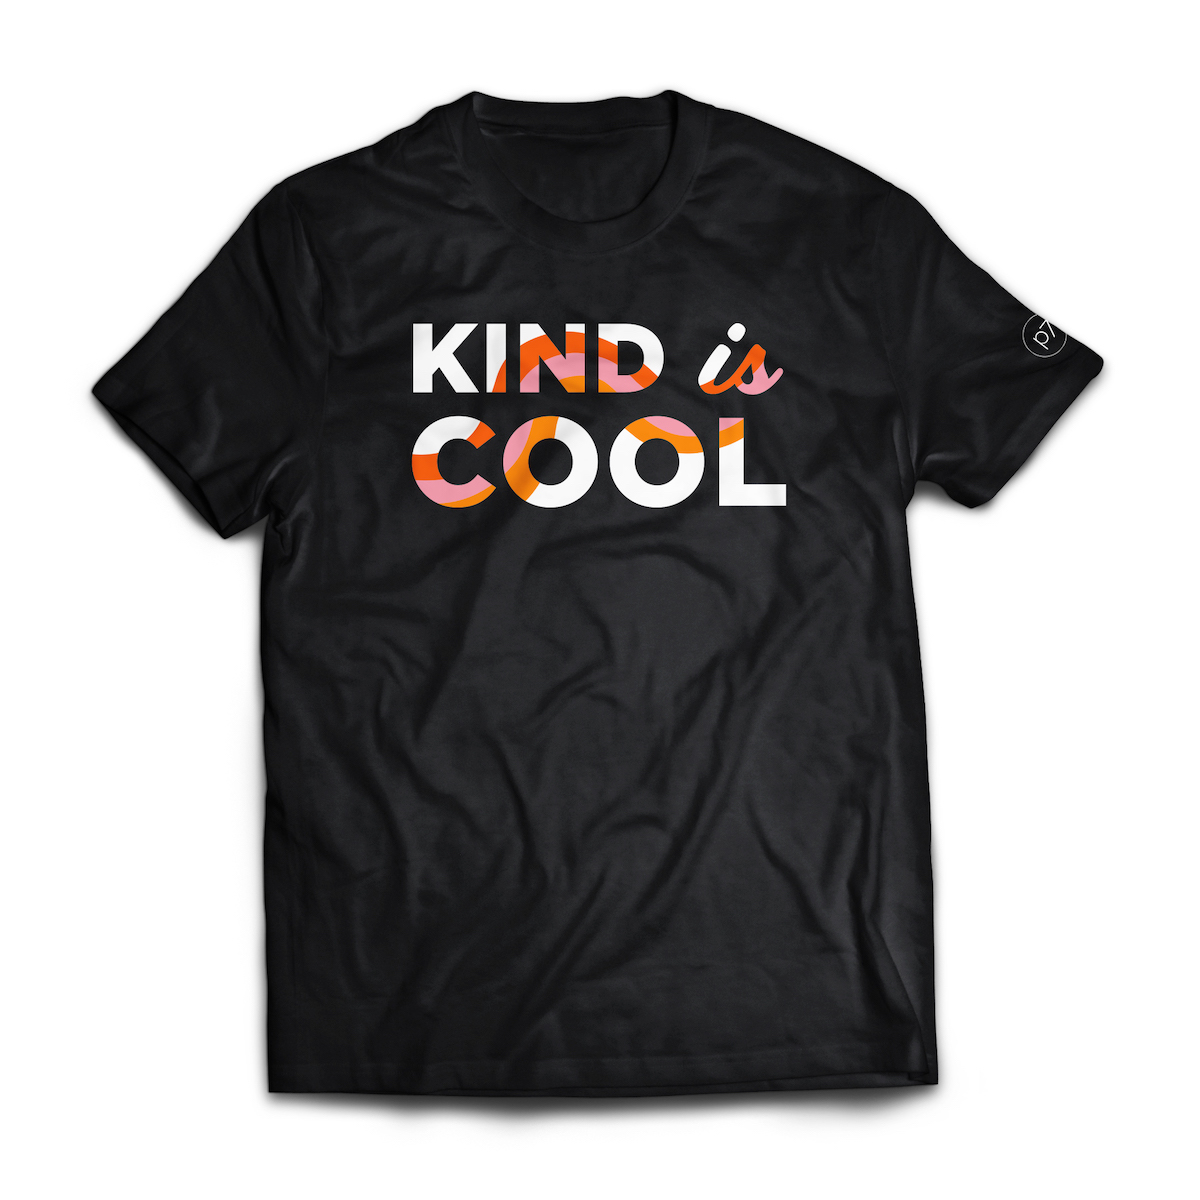 Black T-shirt that says Kind is Cool for project7 design